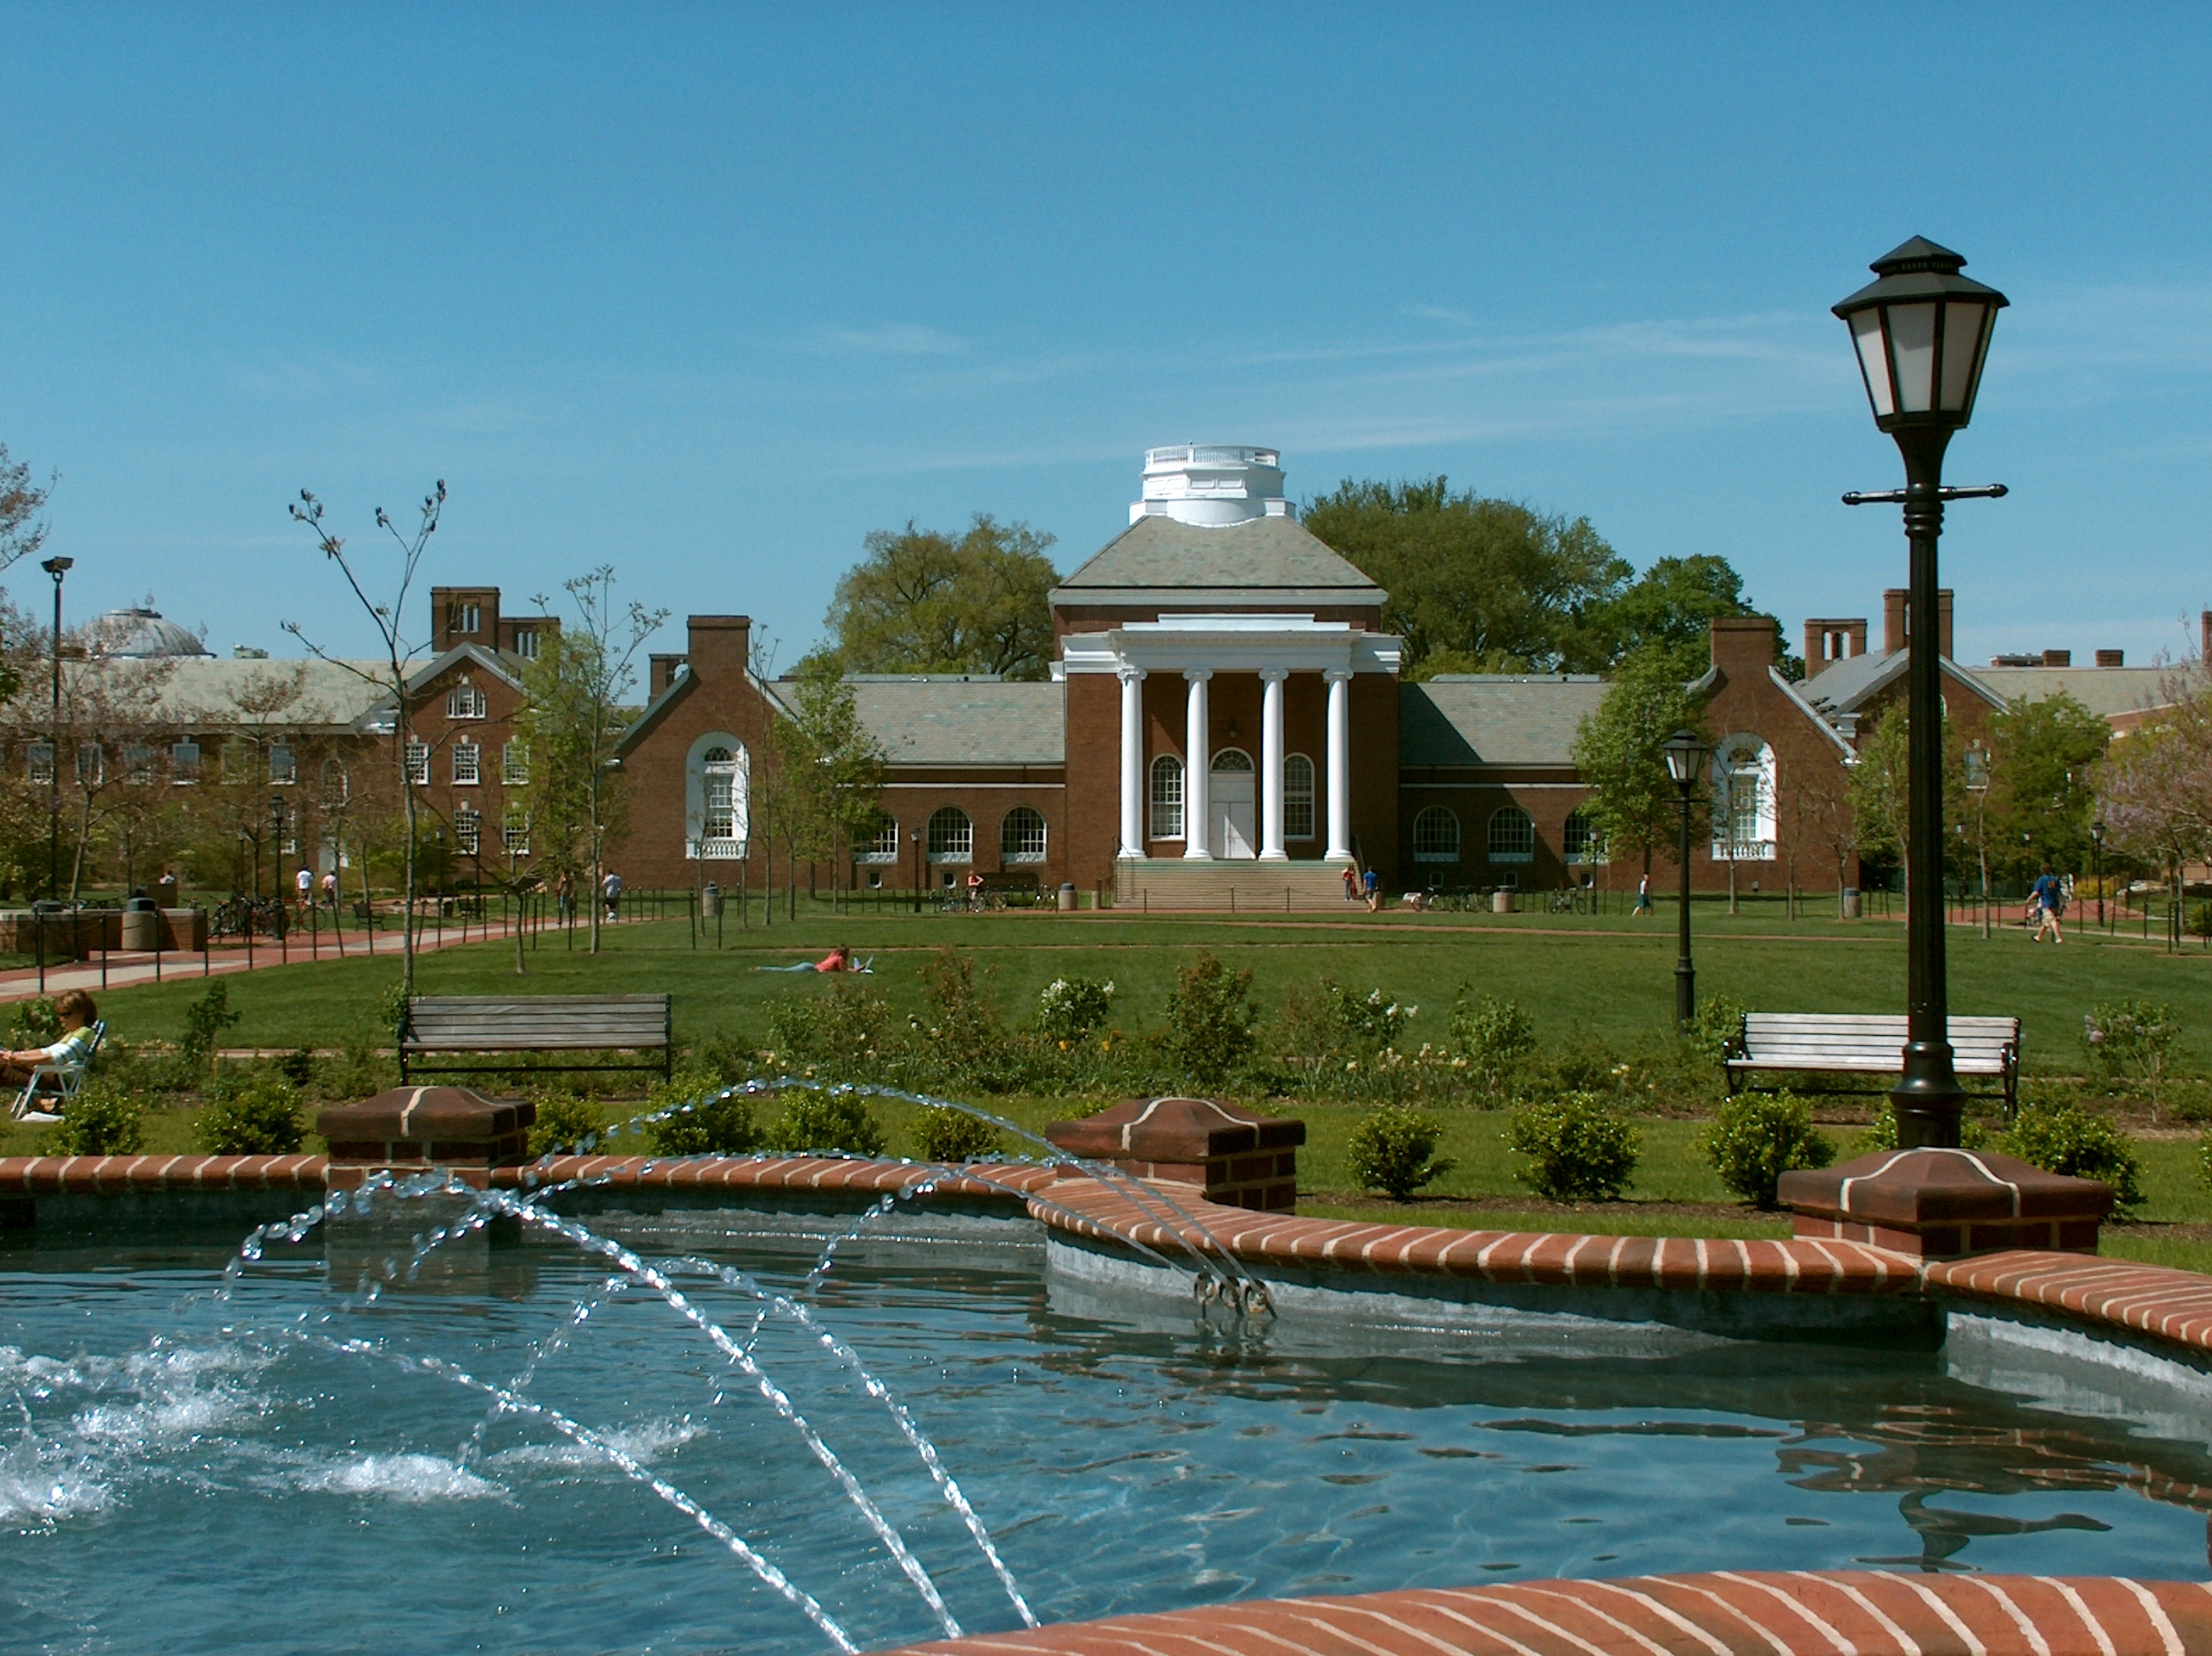 magnolia fountain in foreground, memorial hall in background